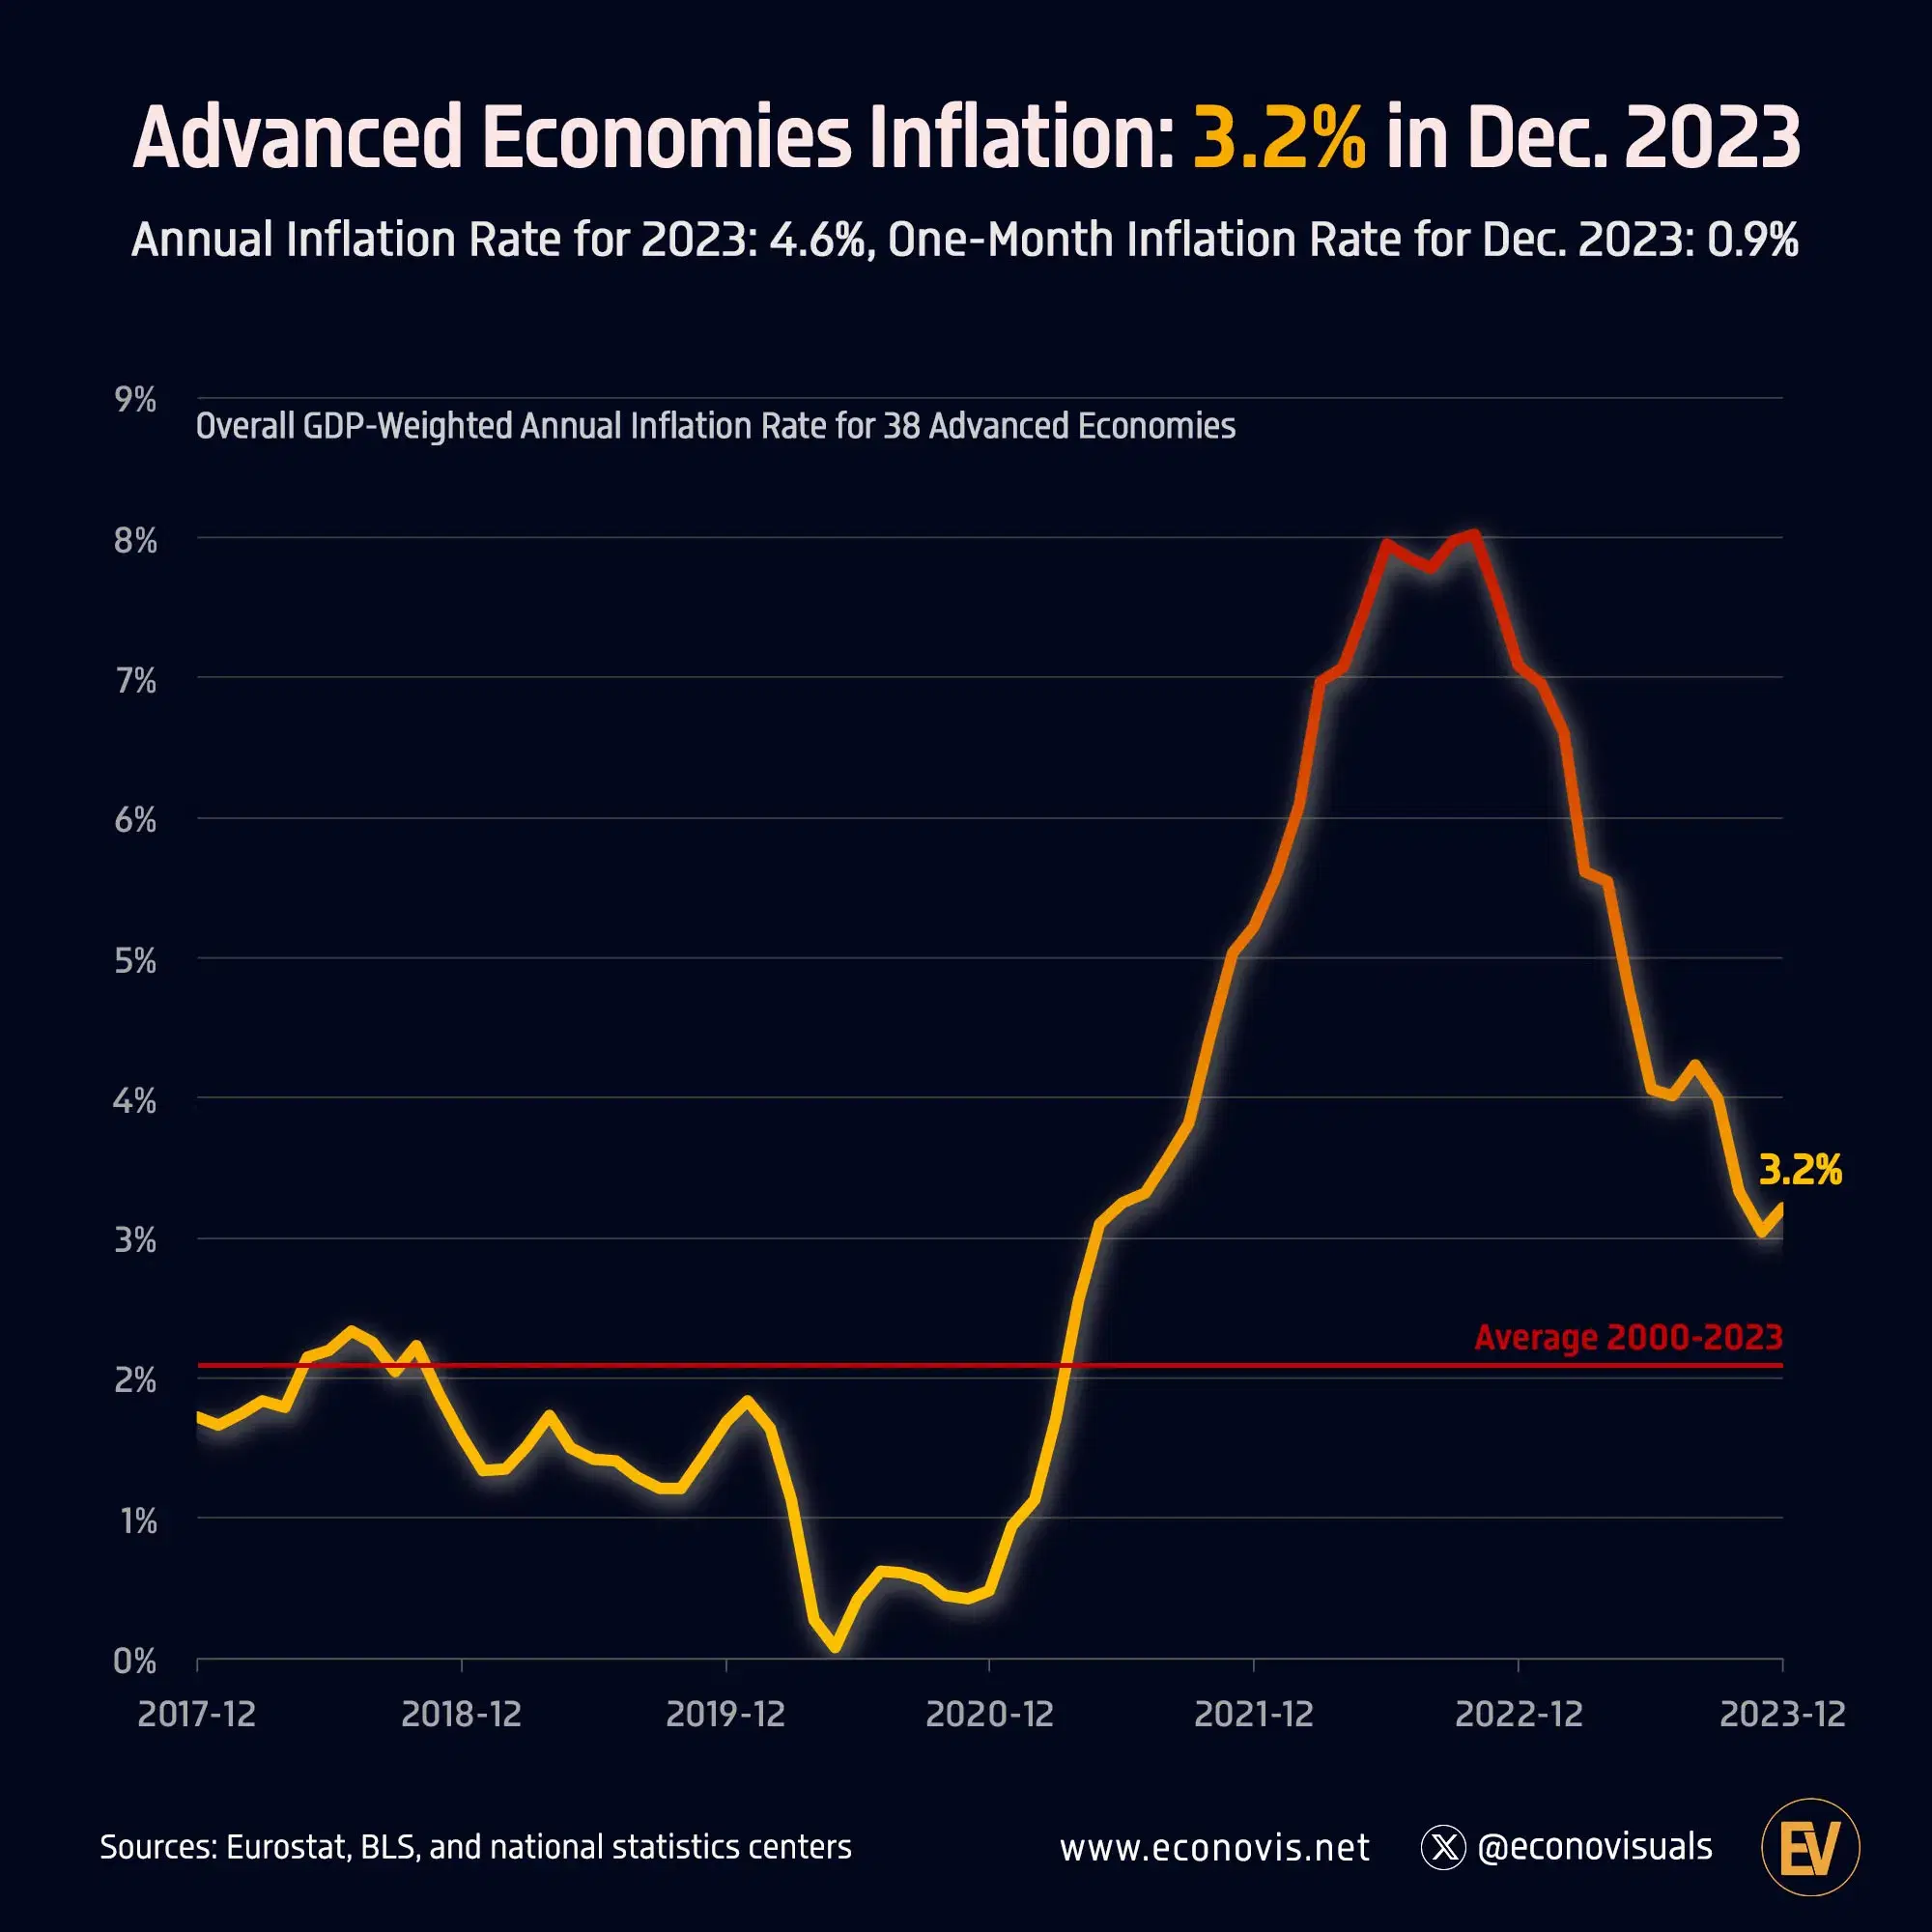 Advanced Economies Inflation: 3.2% in December 2023